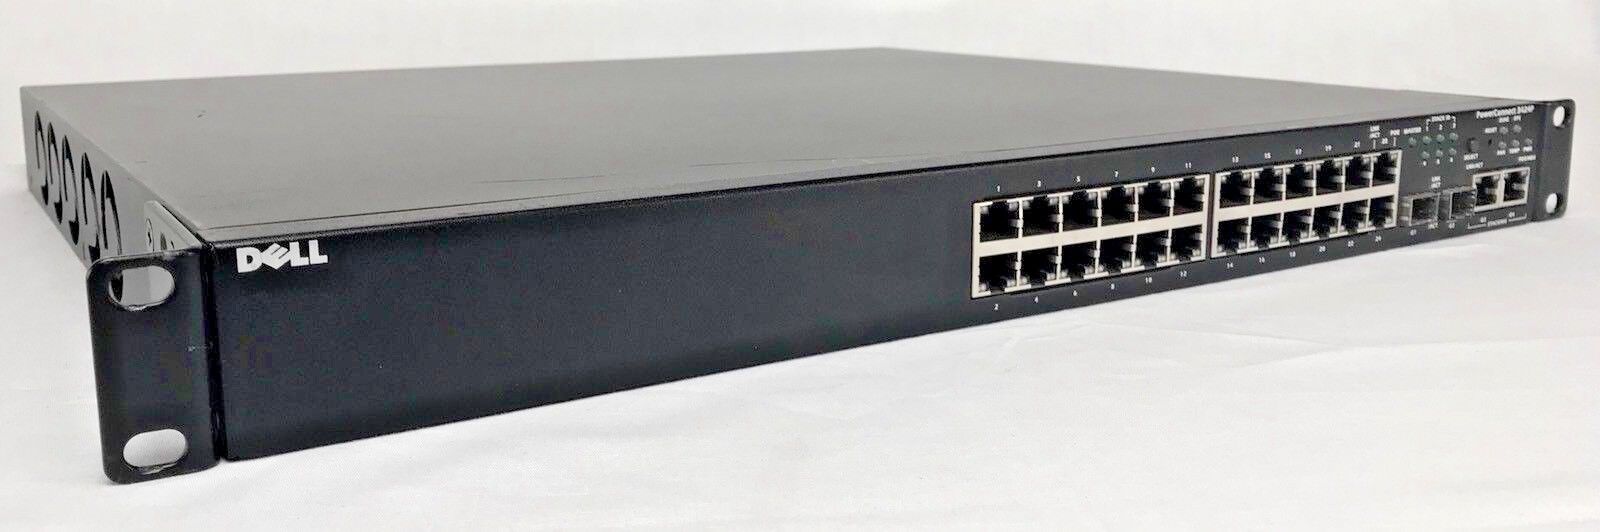 Dell PowerConnect 3424P 24-Port Managed PoE Ethernet Switch w/ Rack Ears 